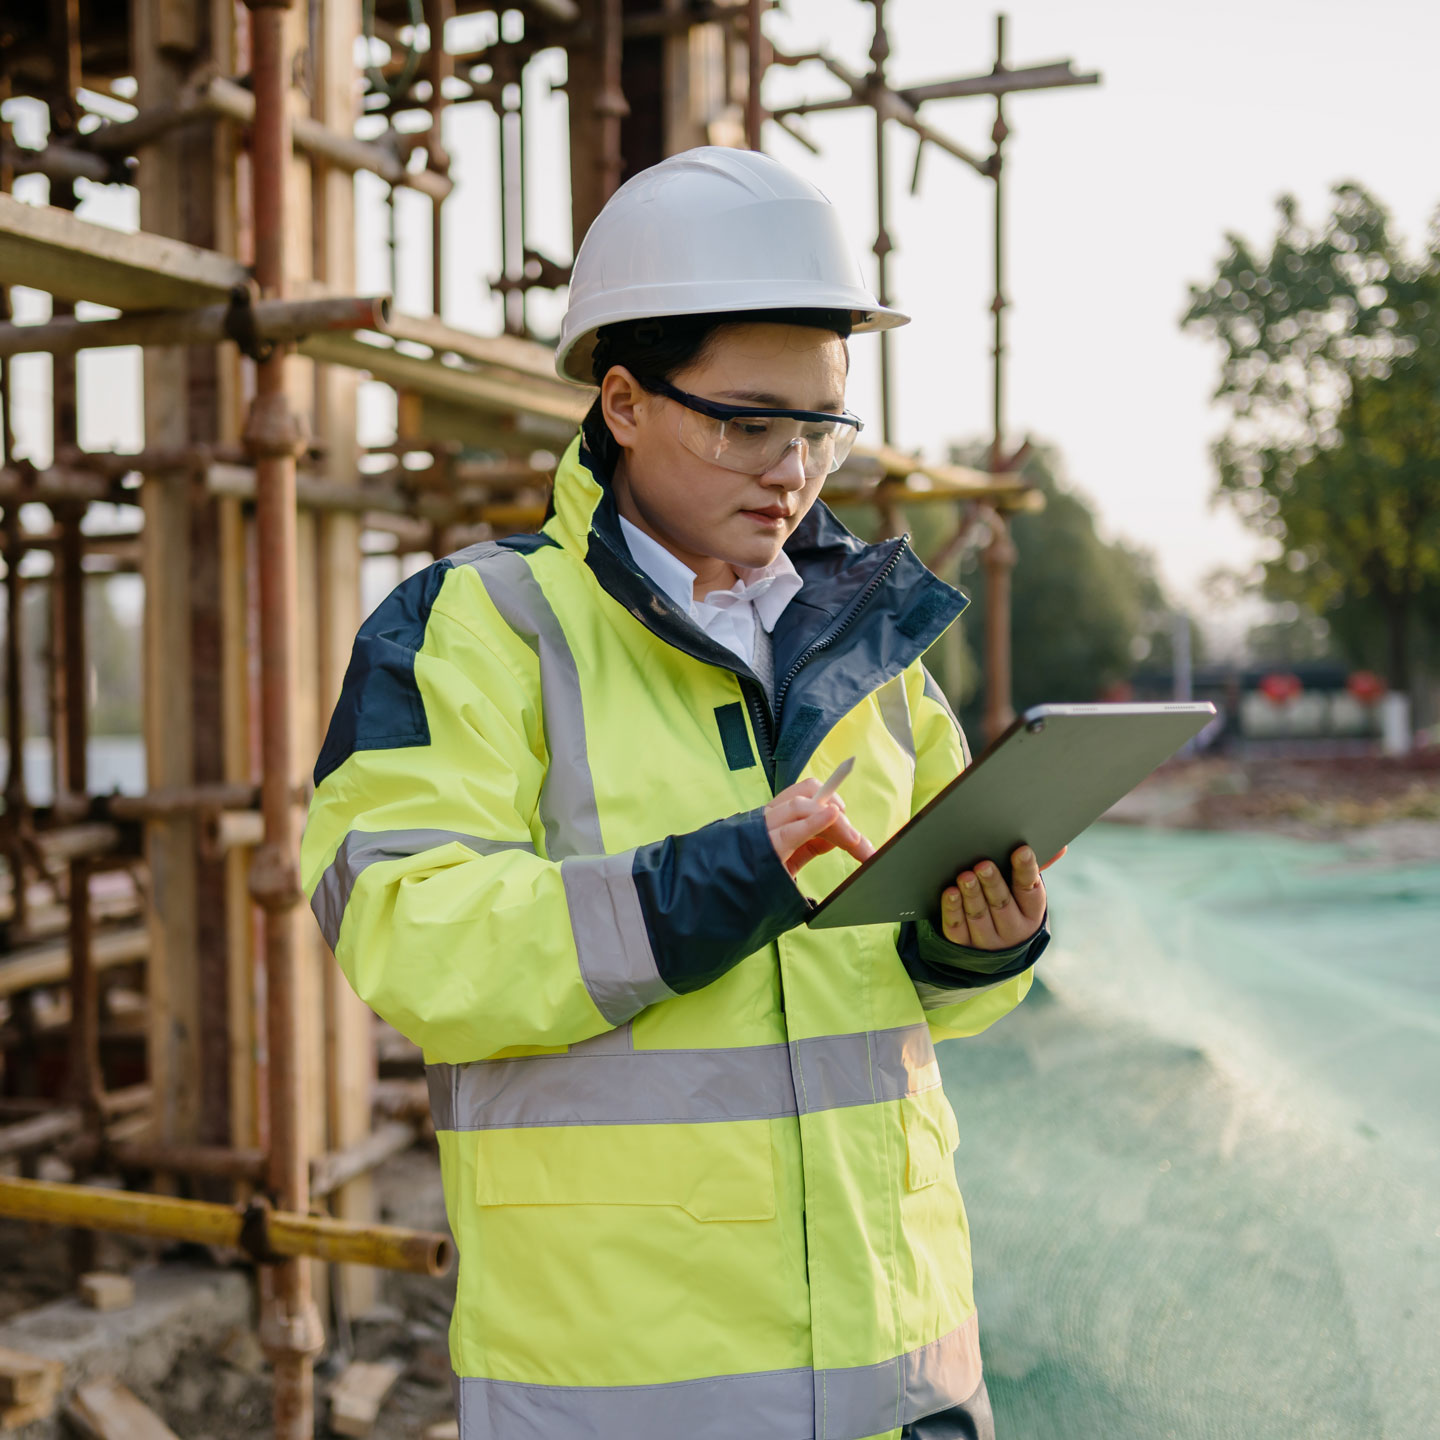 a woman wearing a hard hat and construction uniform looks at an iPad while standing in front of a partially constructed building